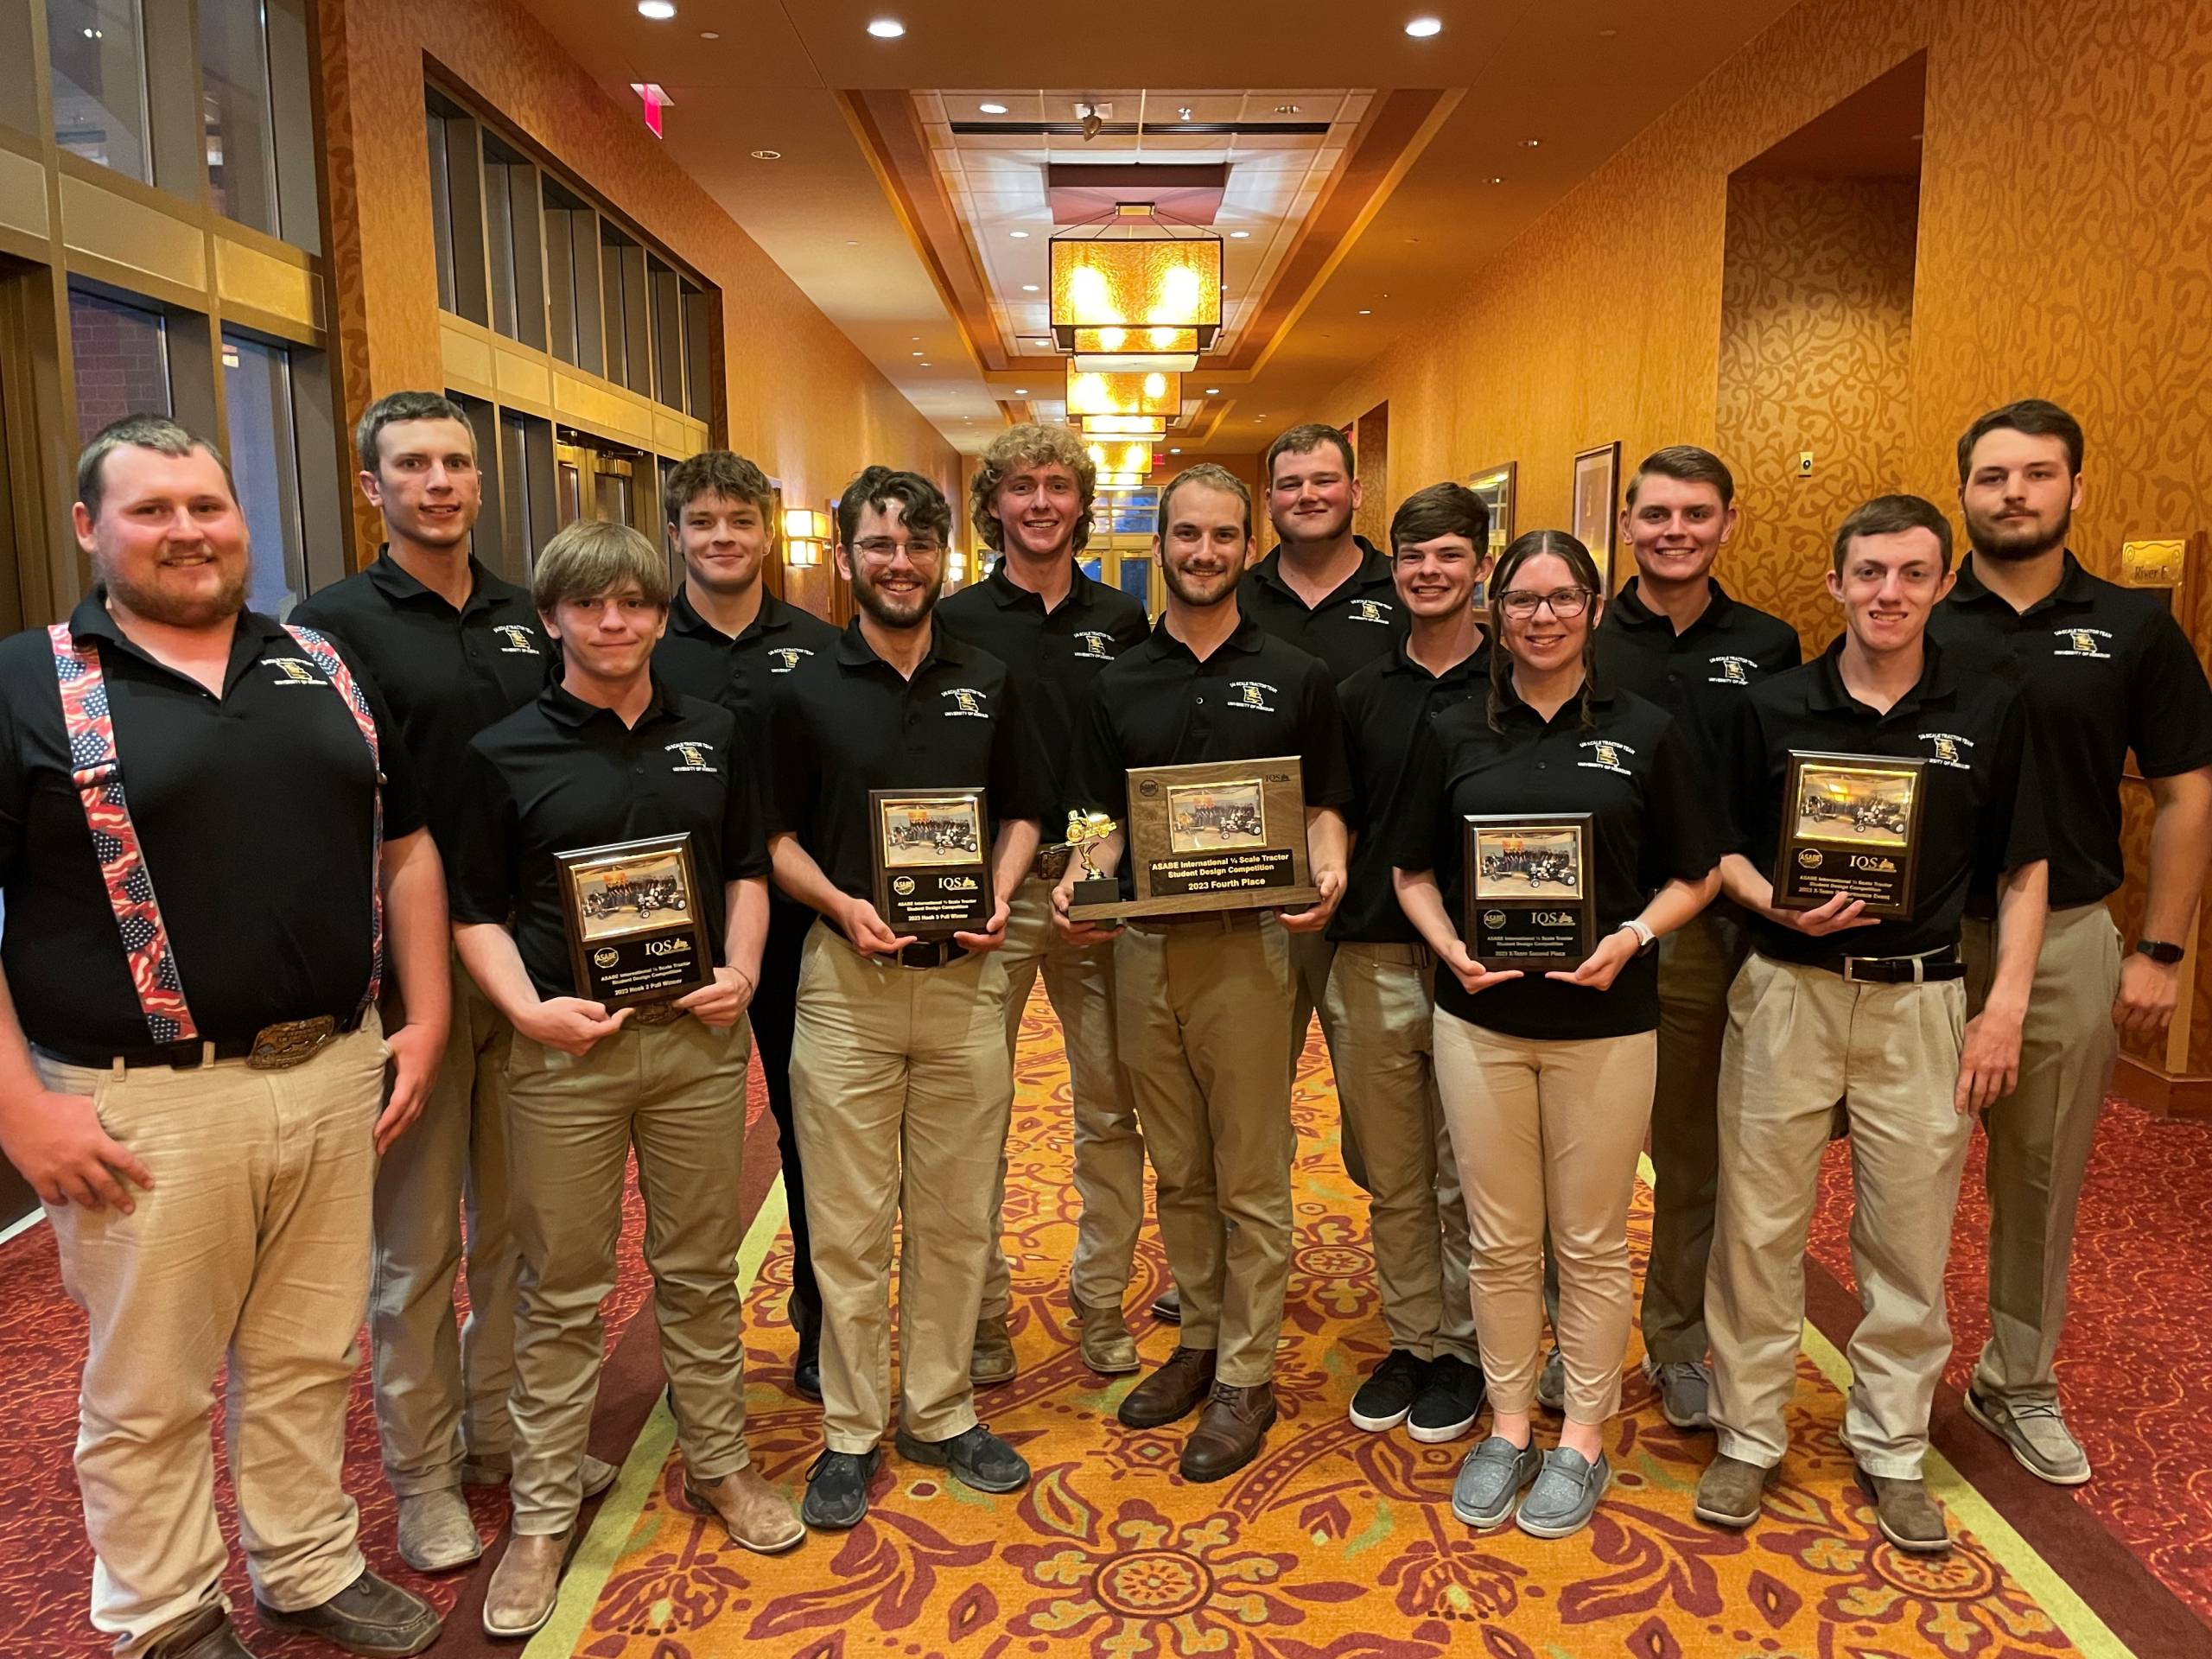 Student team members hold plaques at awards banquet for quarter-scale tractor competition.